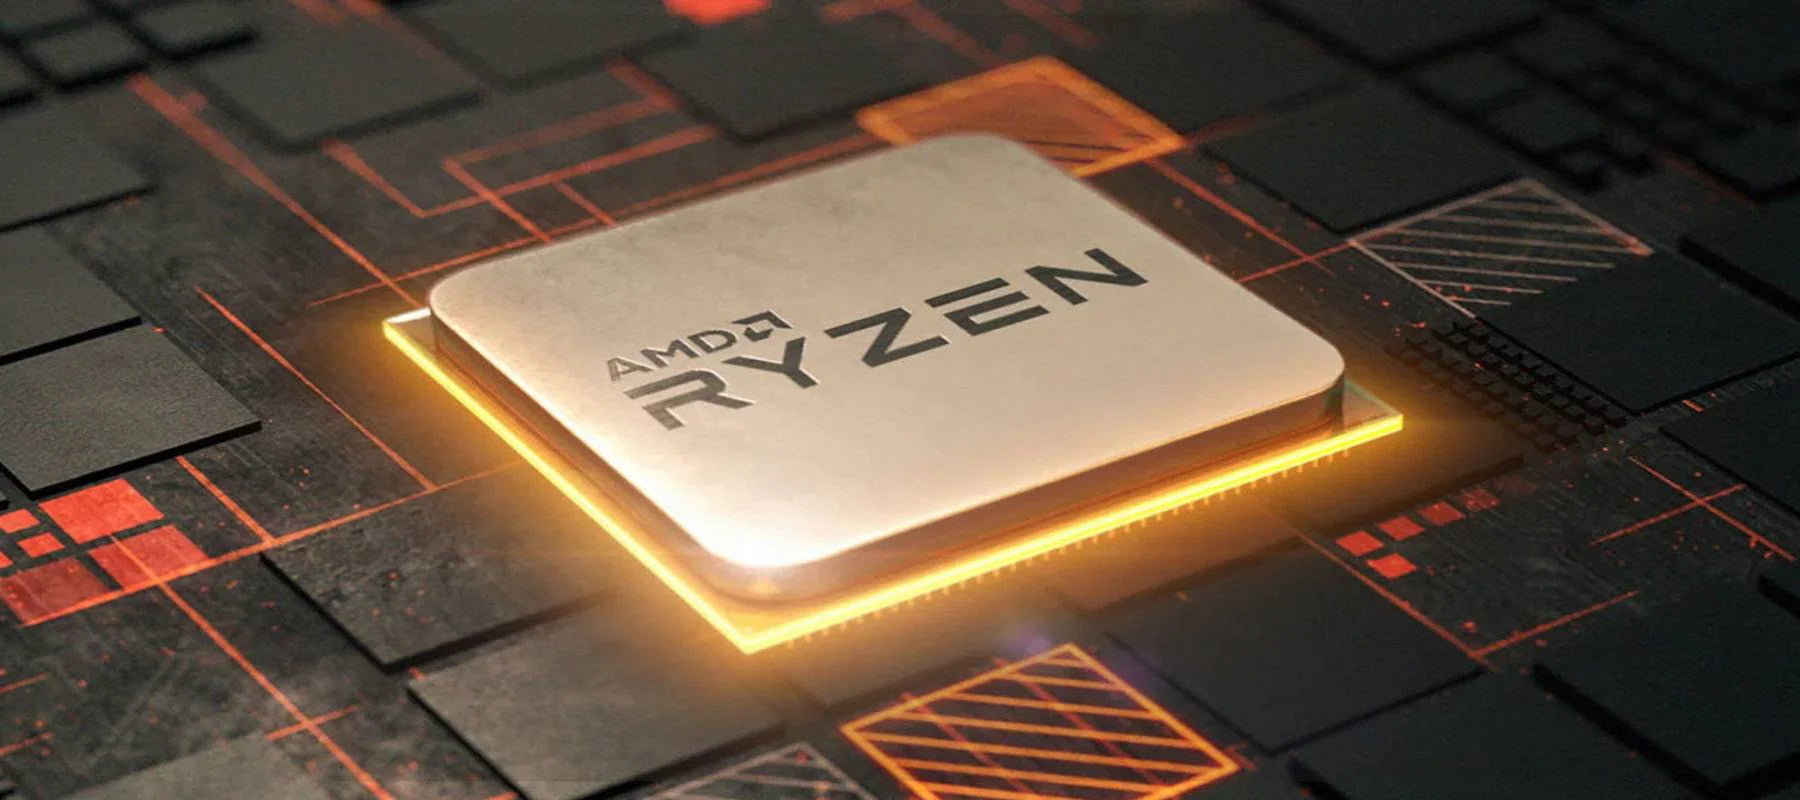 Bringing AMD Ryzen back into the mix with an exciting new line-up!